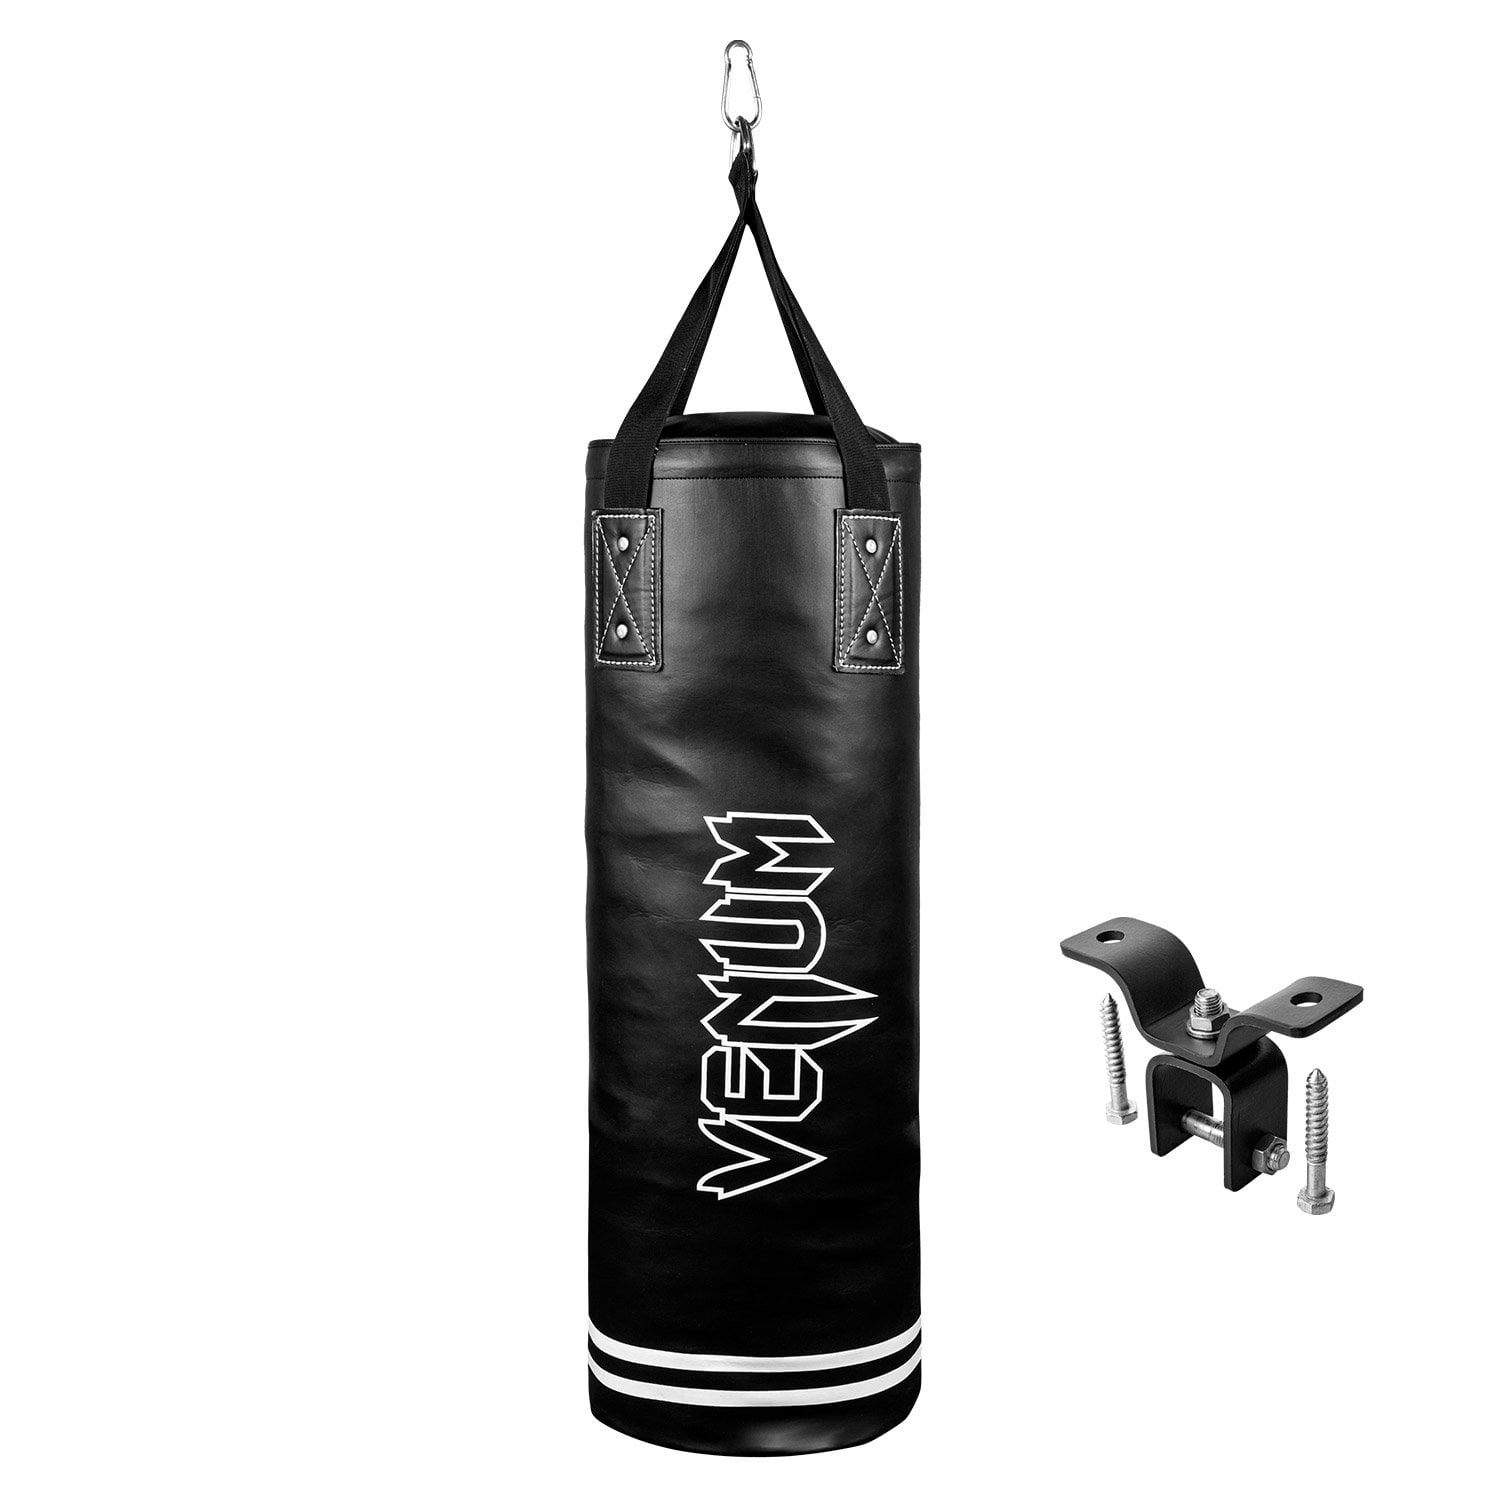 The 10 Best Punching Bags of 2023 According to Boxing Instructors   livestrong